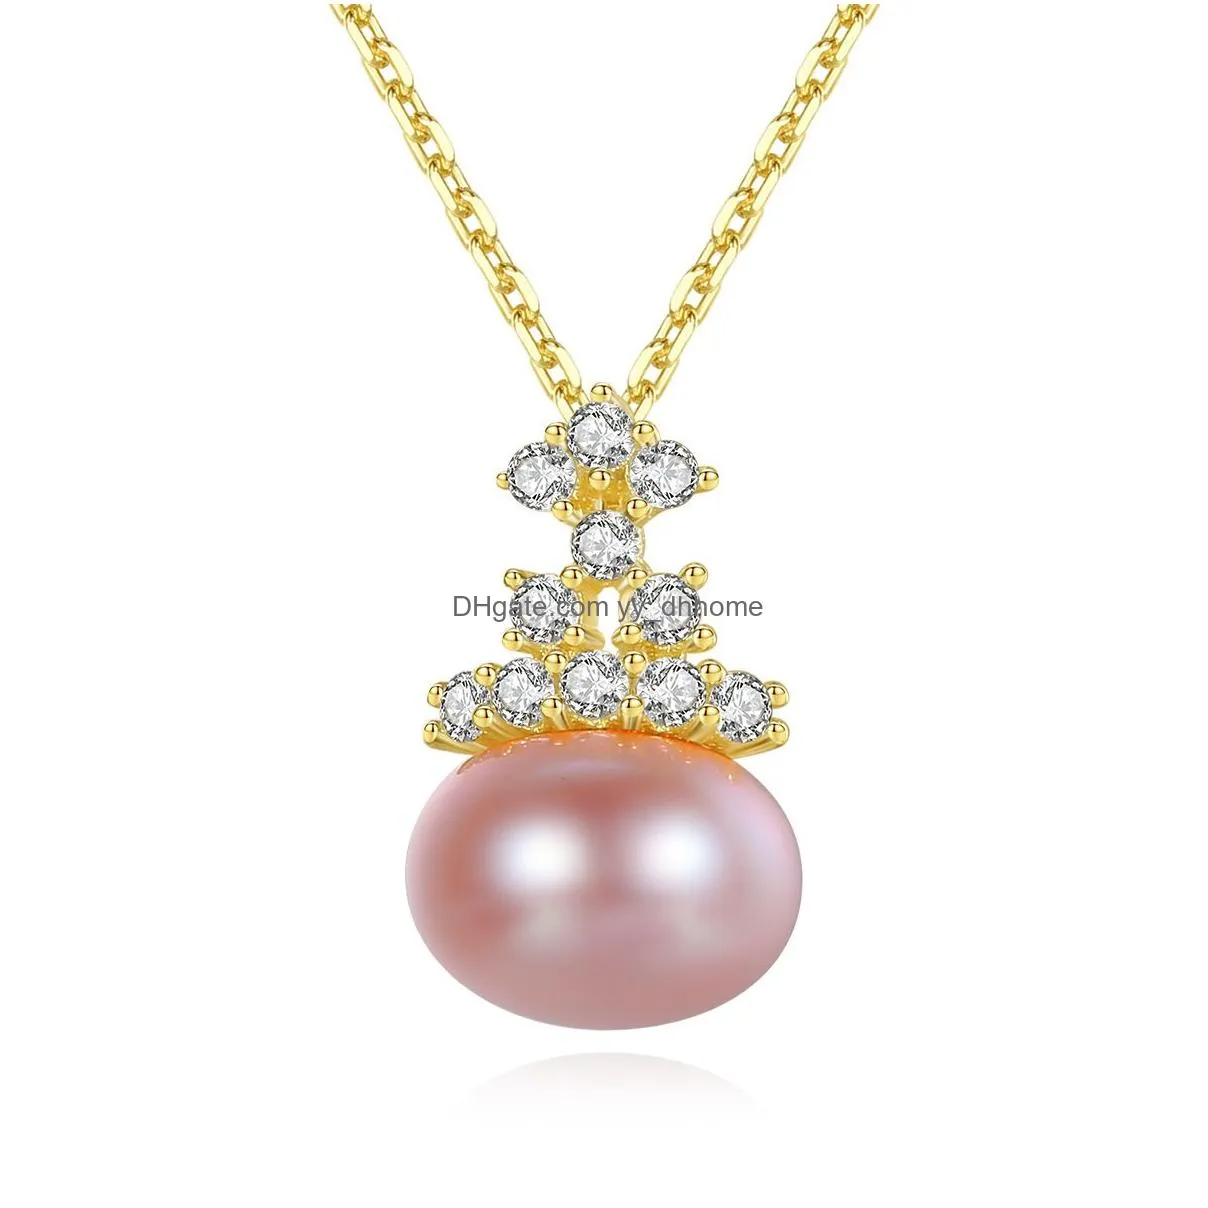 korean fashion sweet pearl shiny zircon crown pendant necklace jewelry sexy charming women clavicle chain necklace accessories